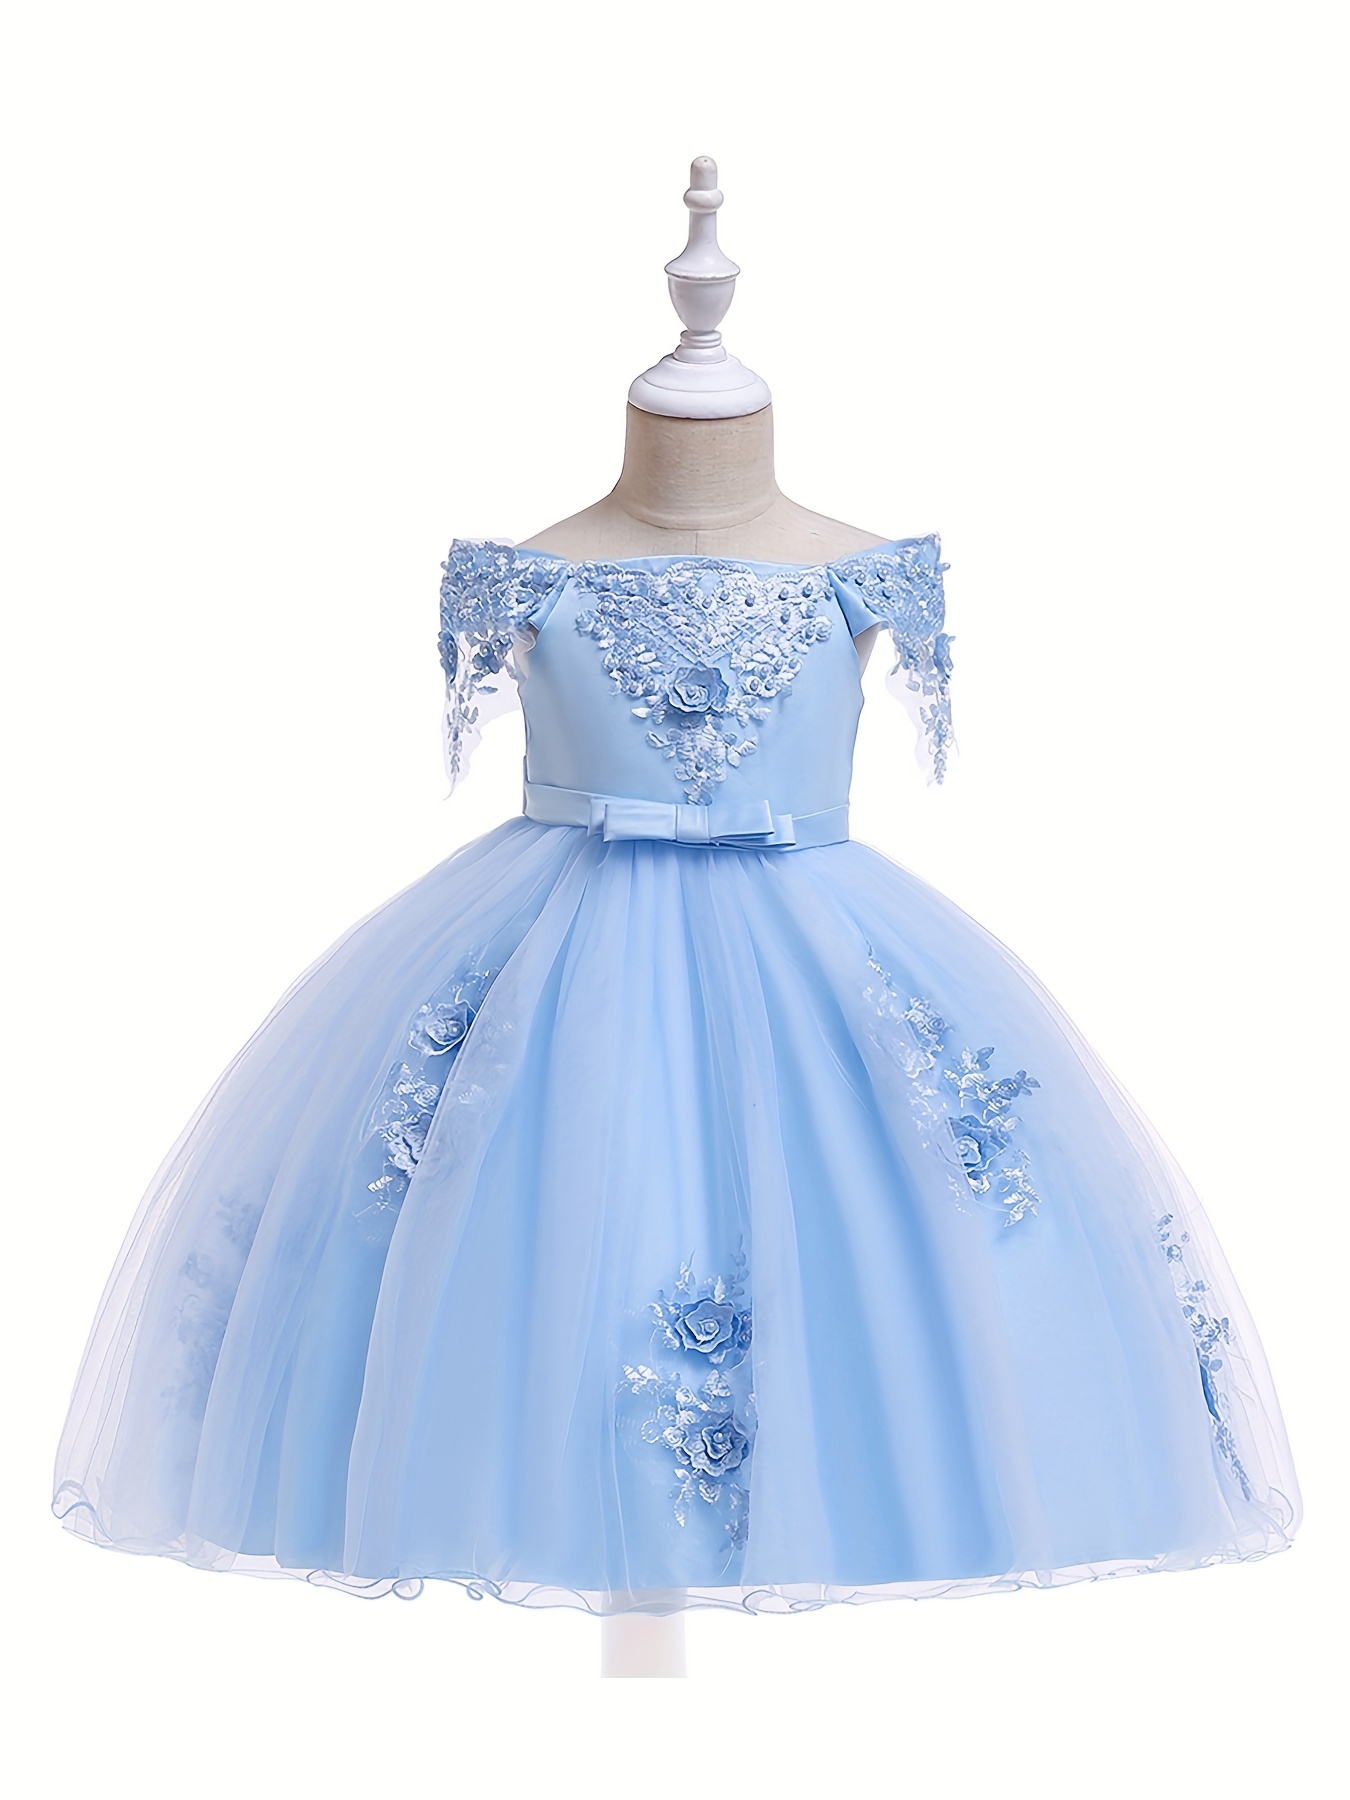 Pretty Ball Gown Royal Blue Flower Girl Dresses Off The Shoulder